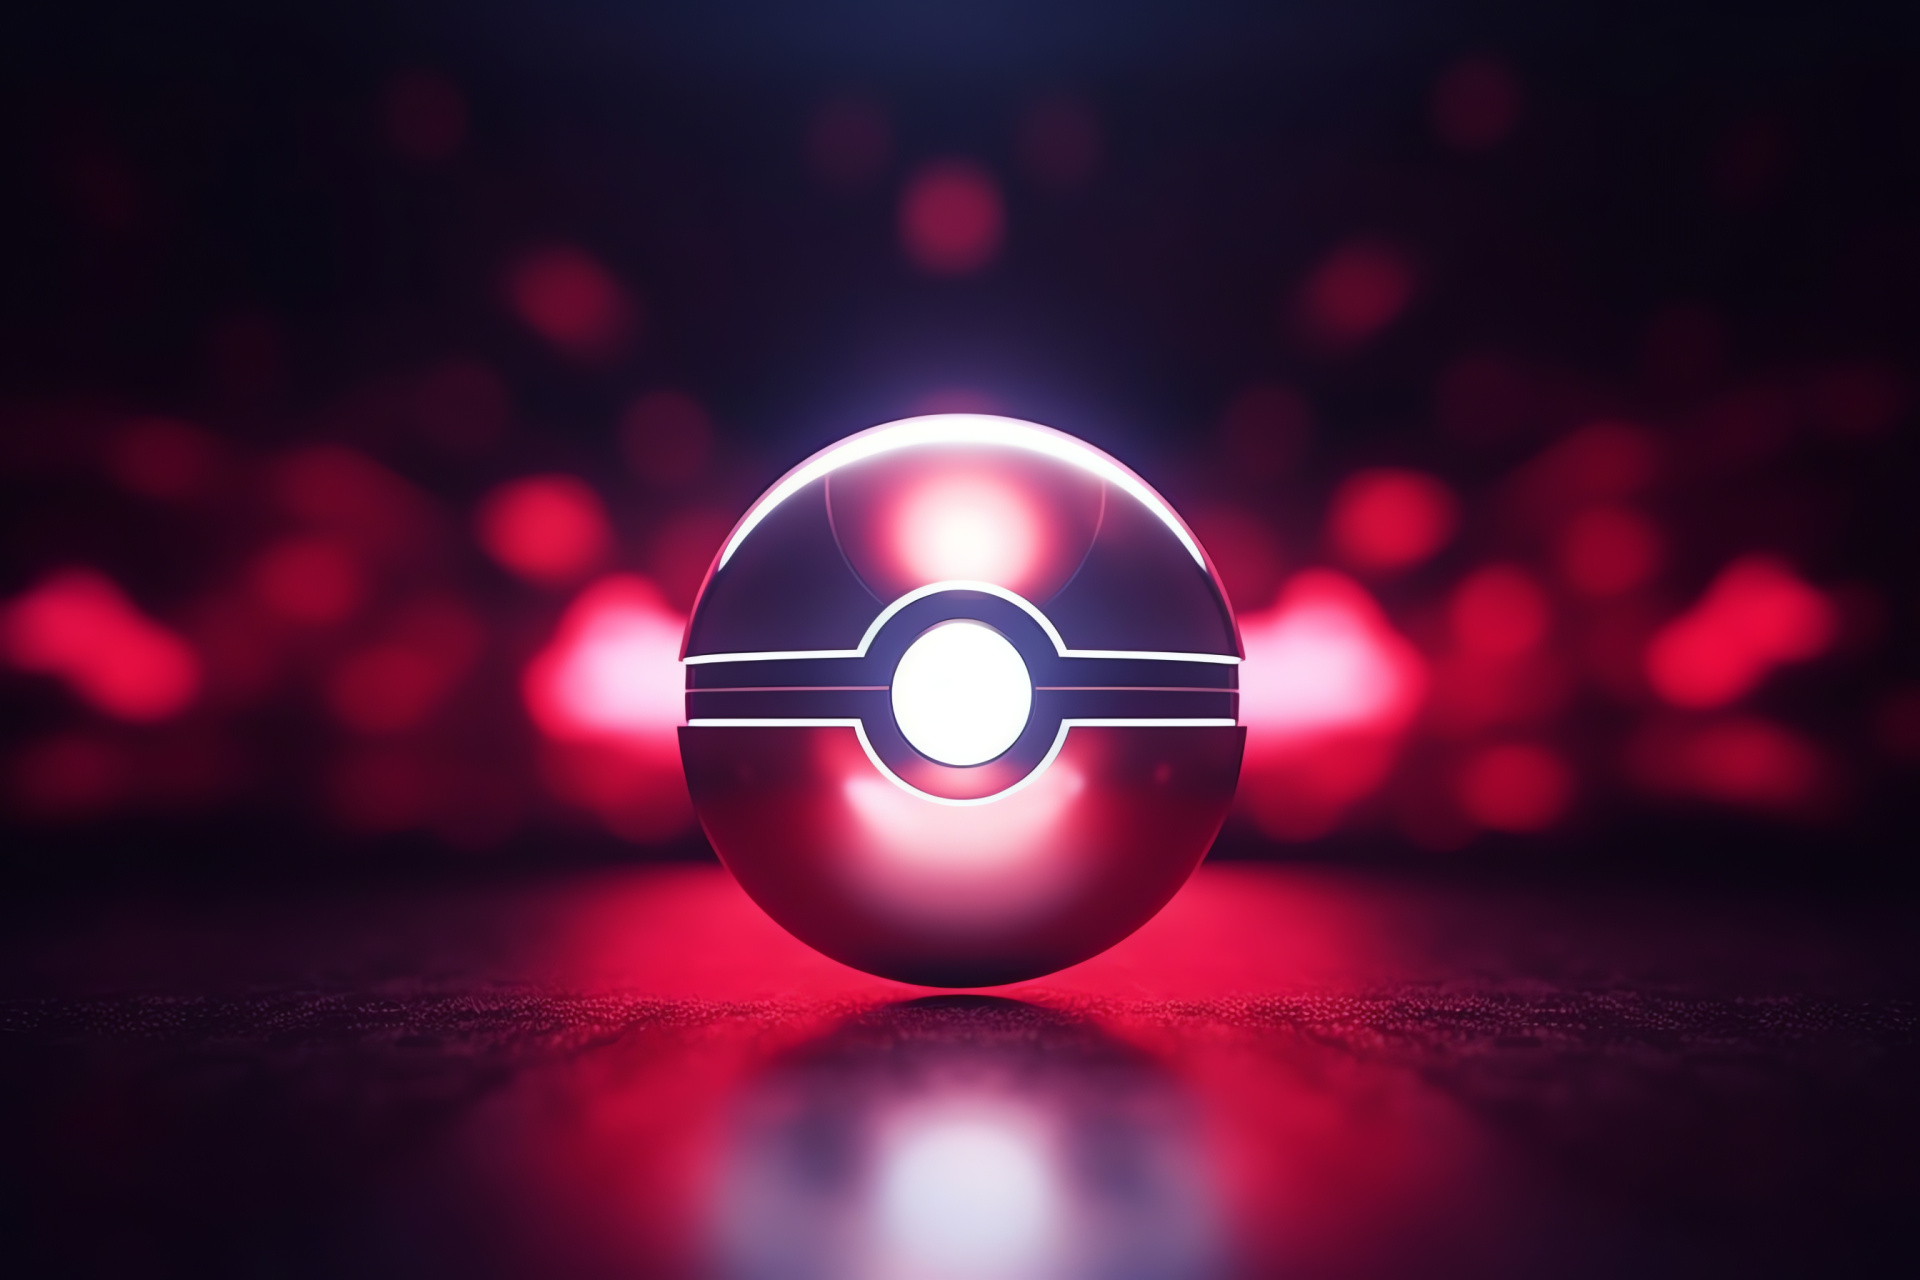 Pokeball accessory, multiple hues, spherical icon, contrast pattern, recognizable button, HD Desktop Wallpaper